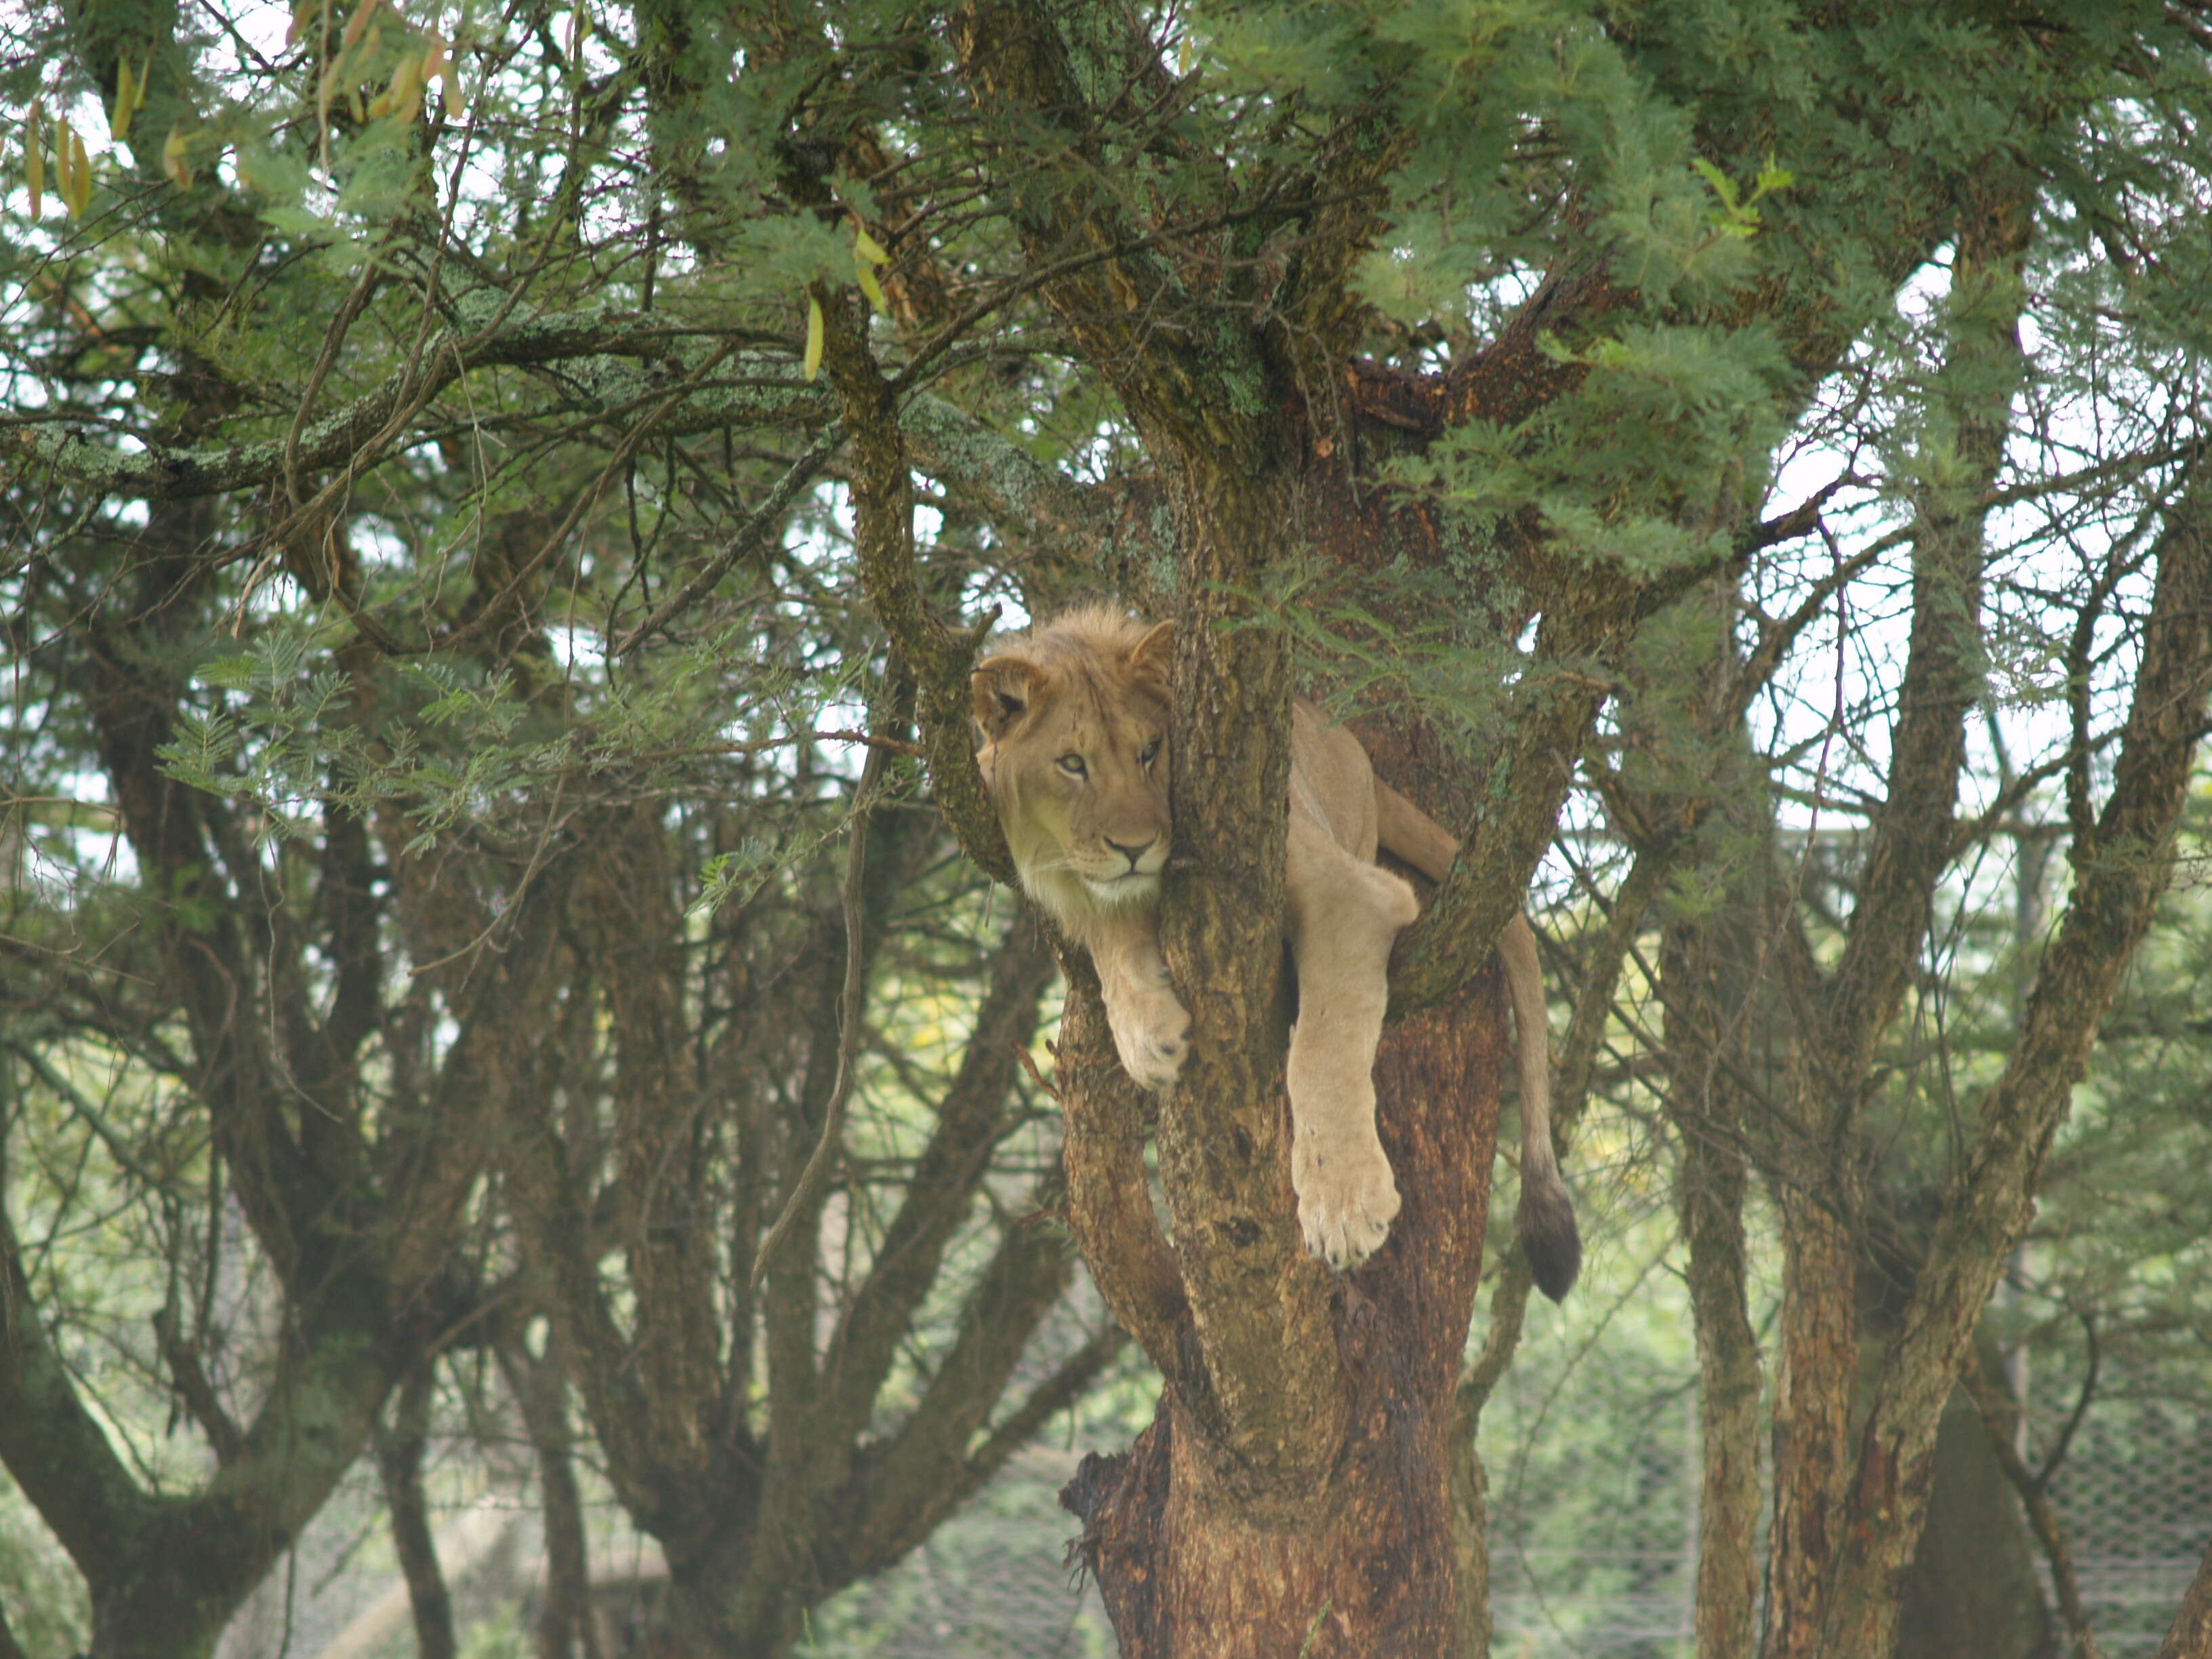 Rescued lion up in a tree